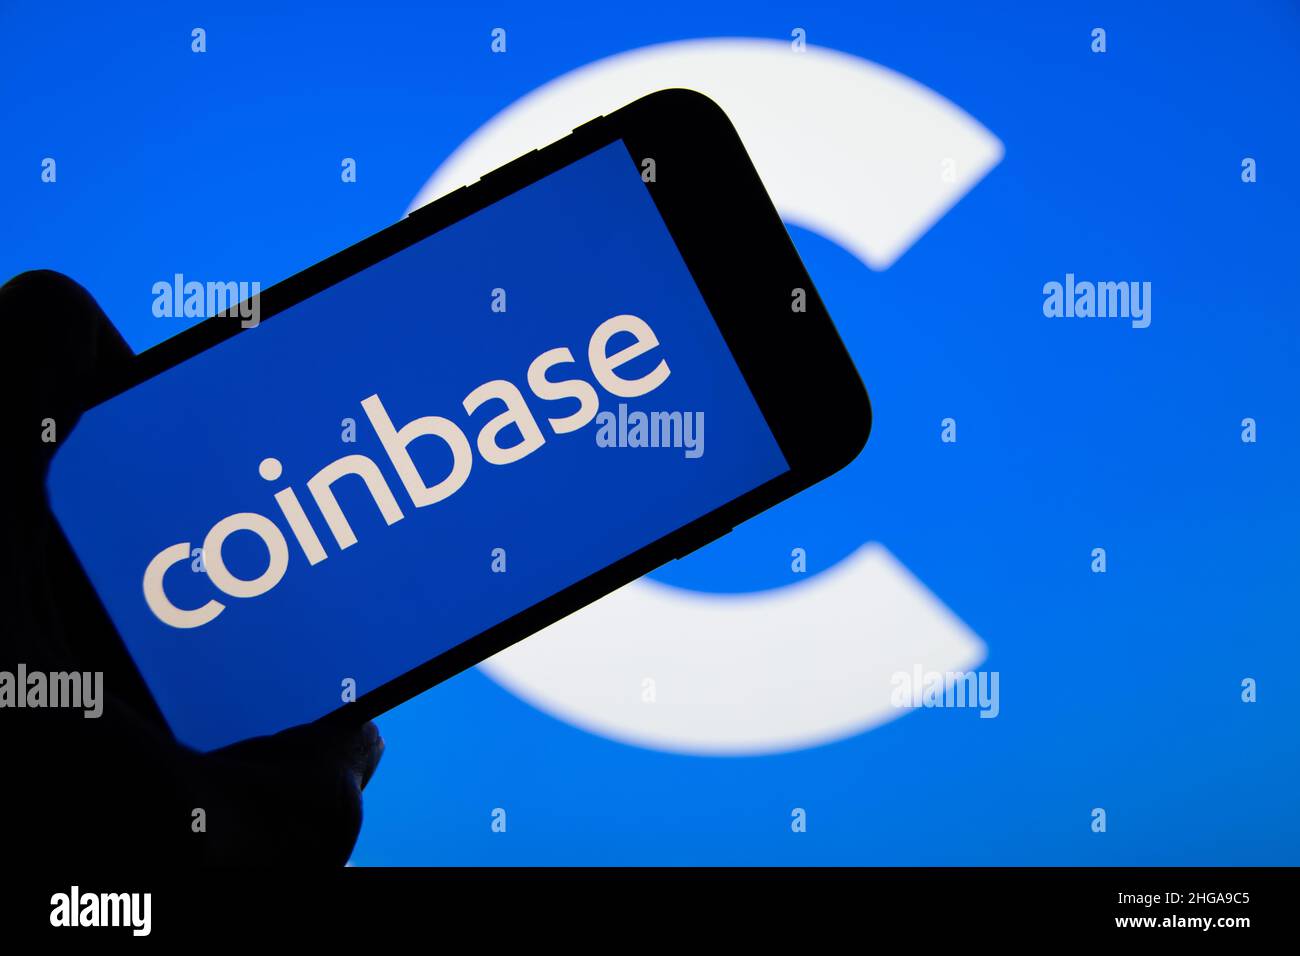 Rheinbach, Germany  11 November 2021,   The brand logo of the trading platform for cryptocurrency 'Coinbase' on the display of a smartphone. Stock Photo